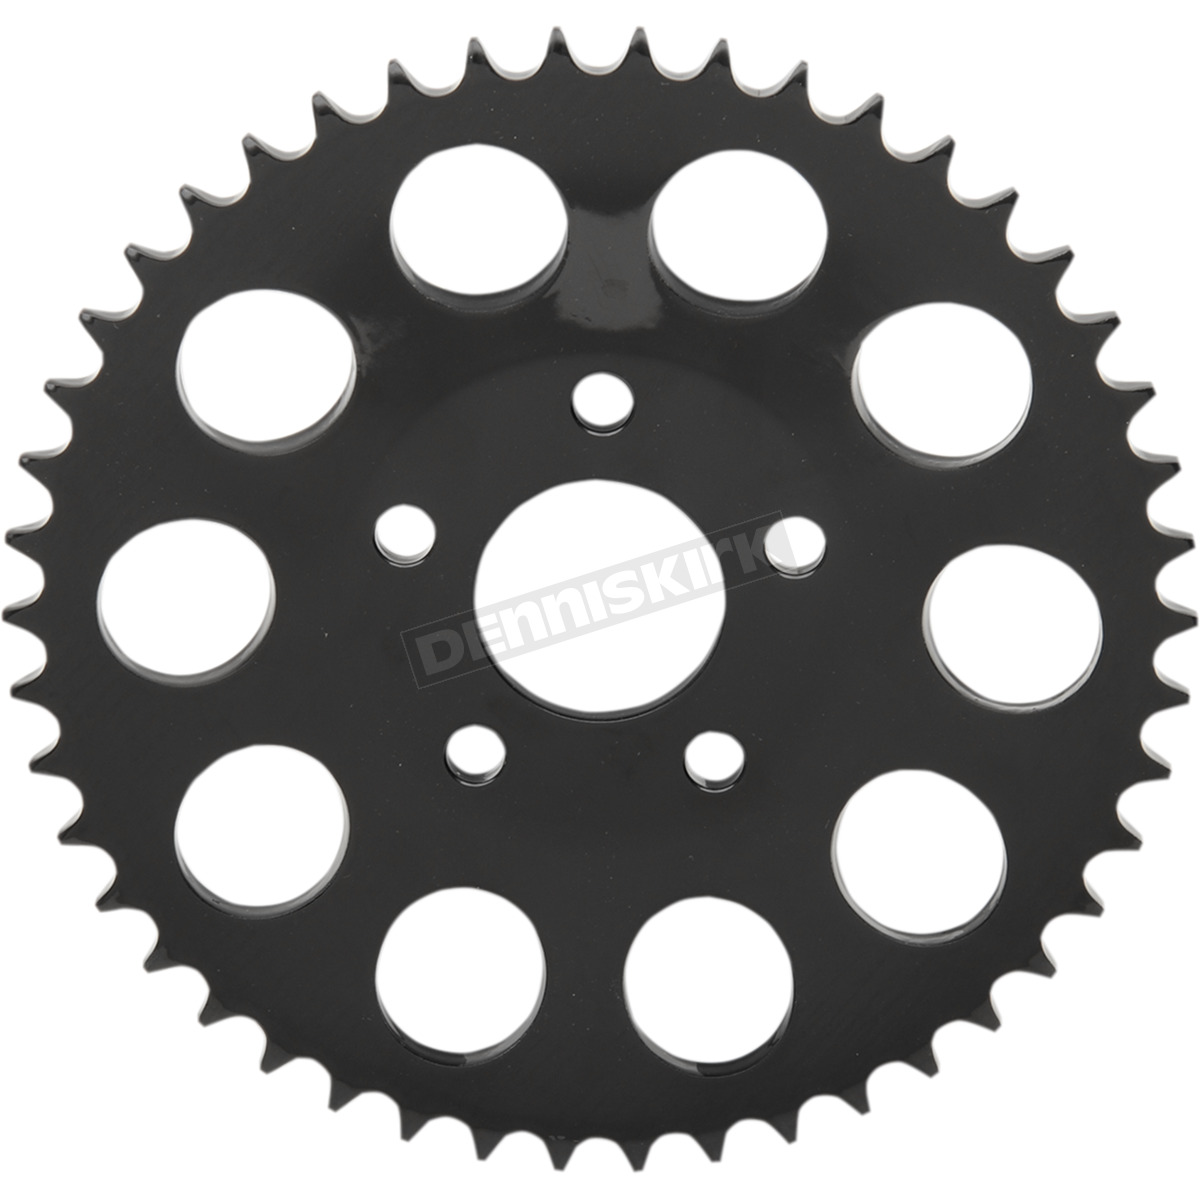 33 SPLINE NEW SOUTHWEST SPEED 23 TOOTH 1.06 OFFSET FRONT COUNTERSHAFT HARLEY MOTORCYCLE SPROCKET FOR 530 CHAINS 1986-2006 HARLEY DAVIDSON BIG TWIN 5 SPEED BIKES 